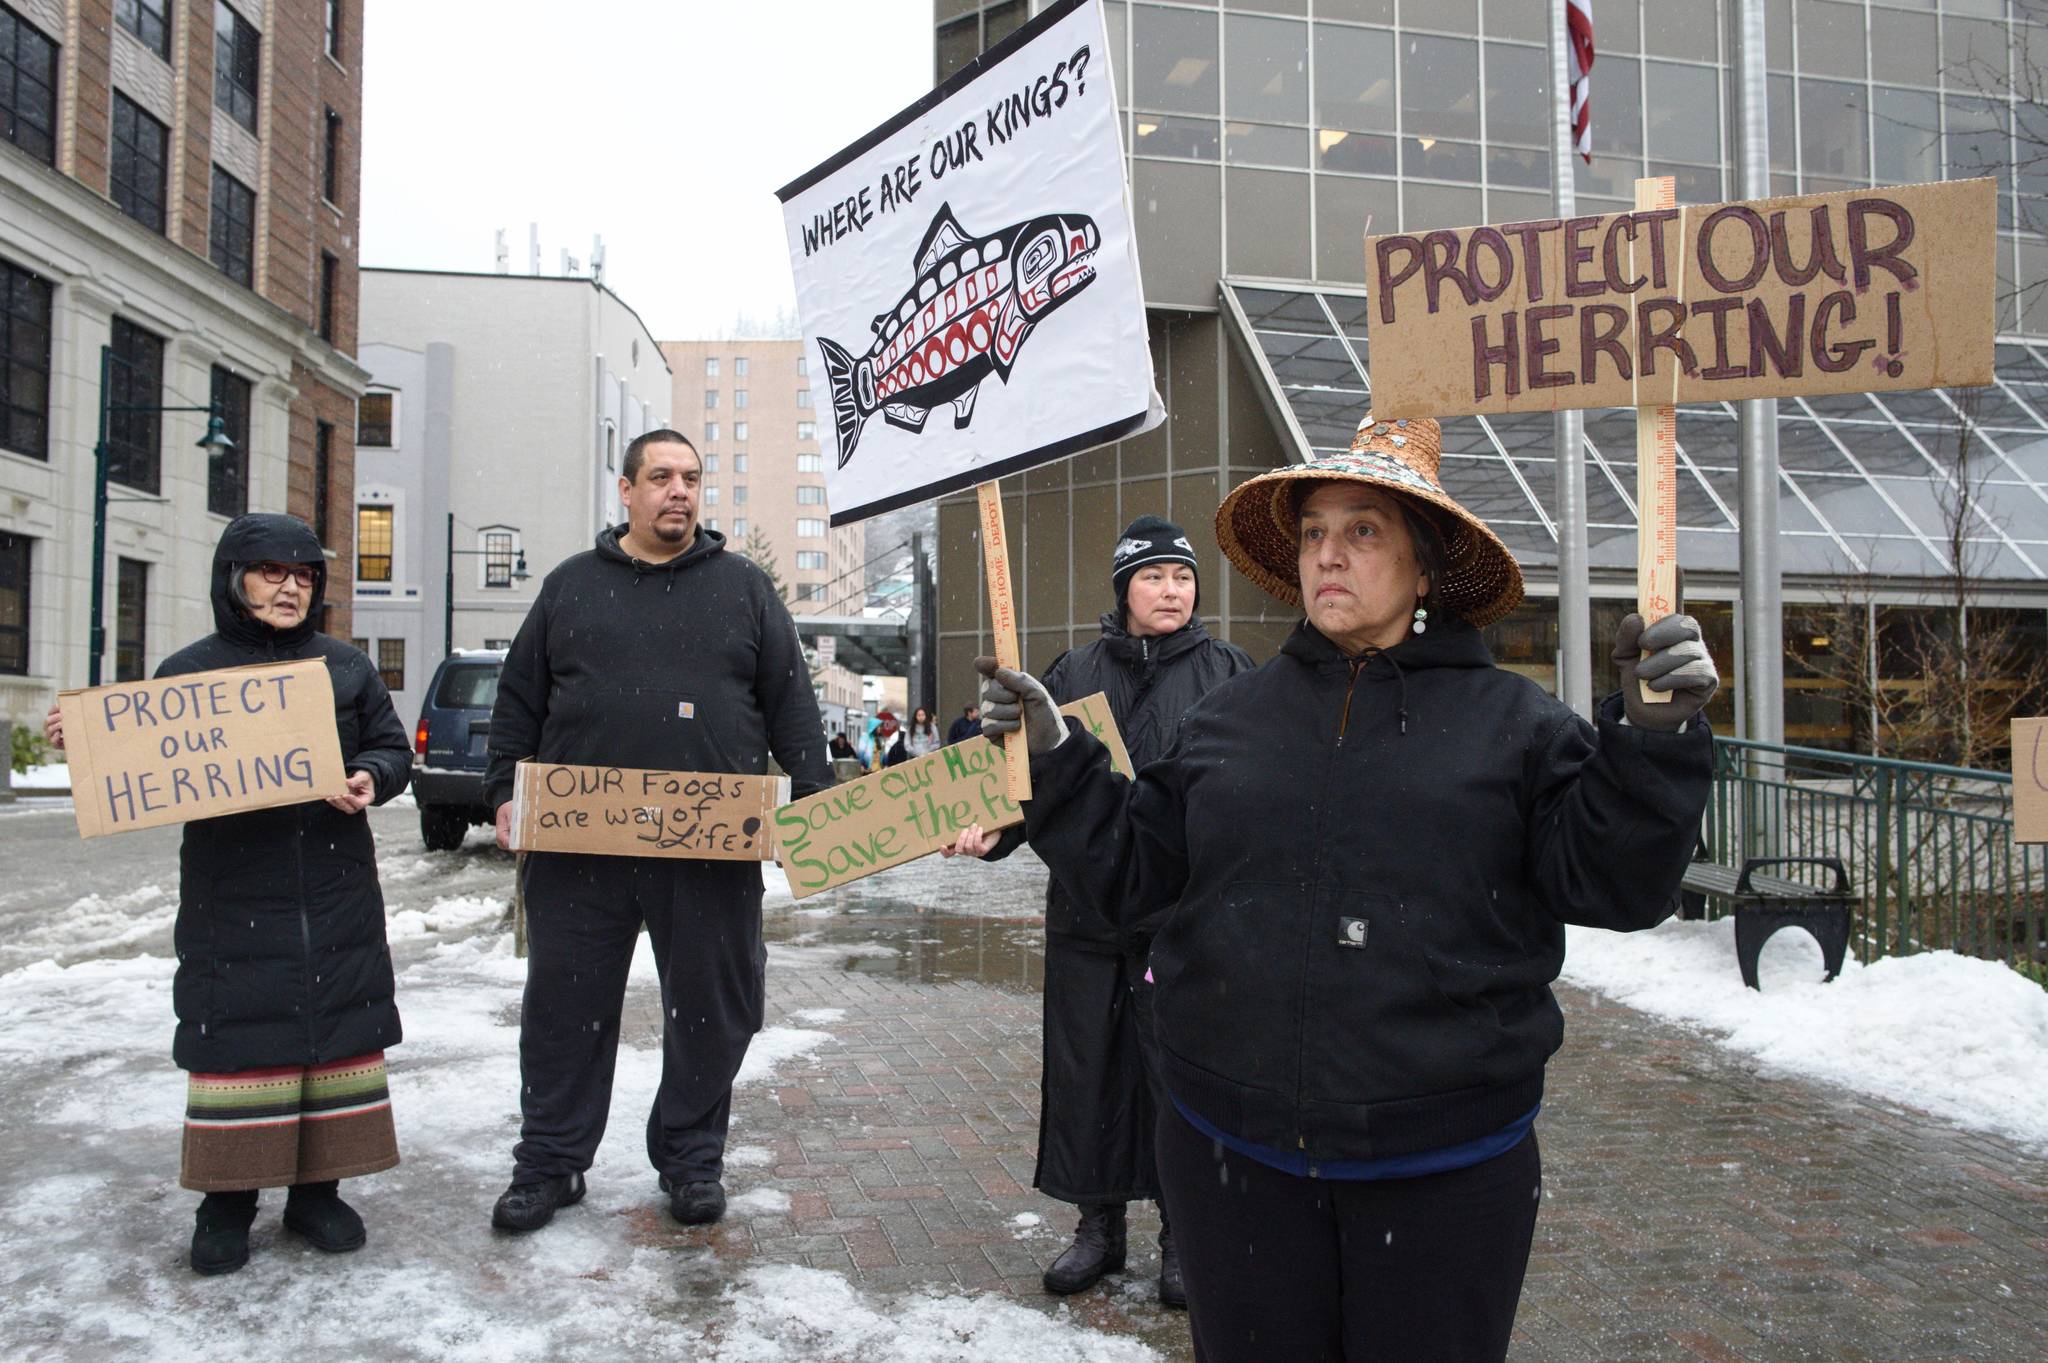 Tribe takes state to court in attempt to protect herring